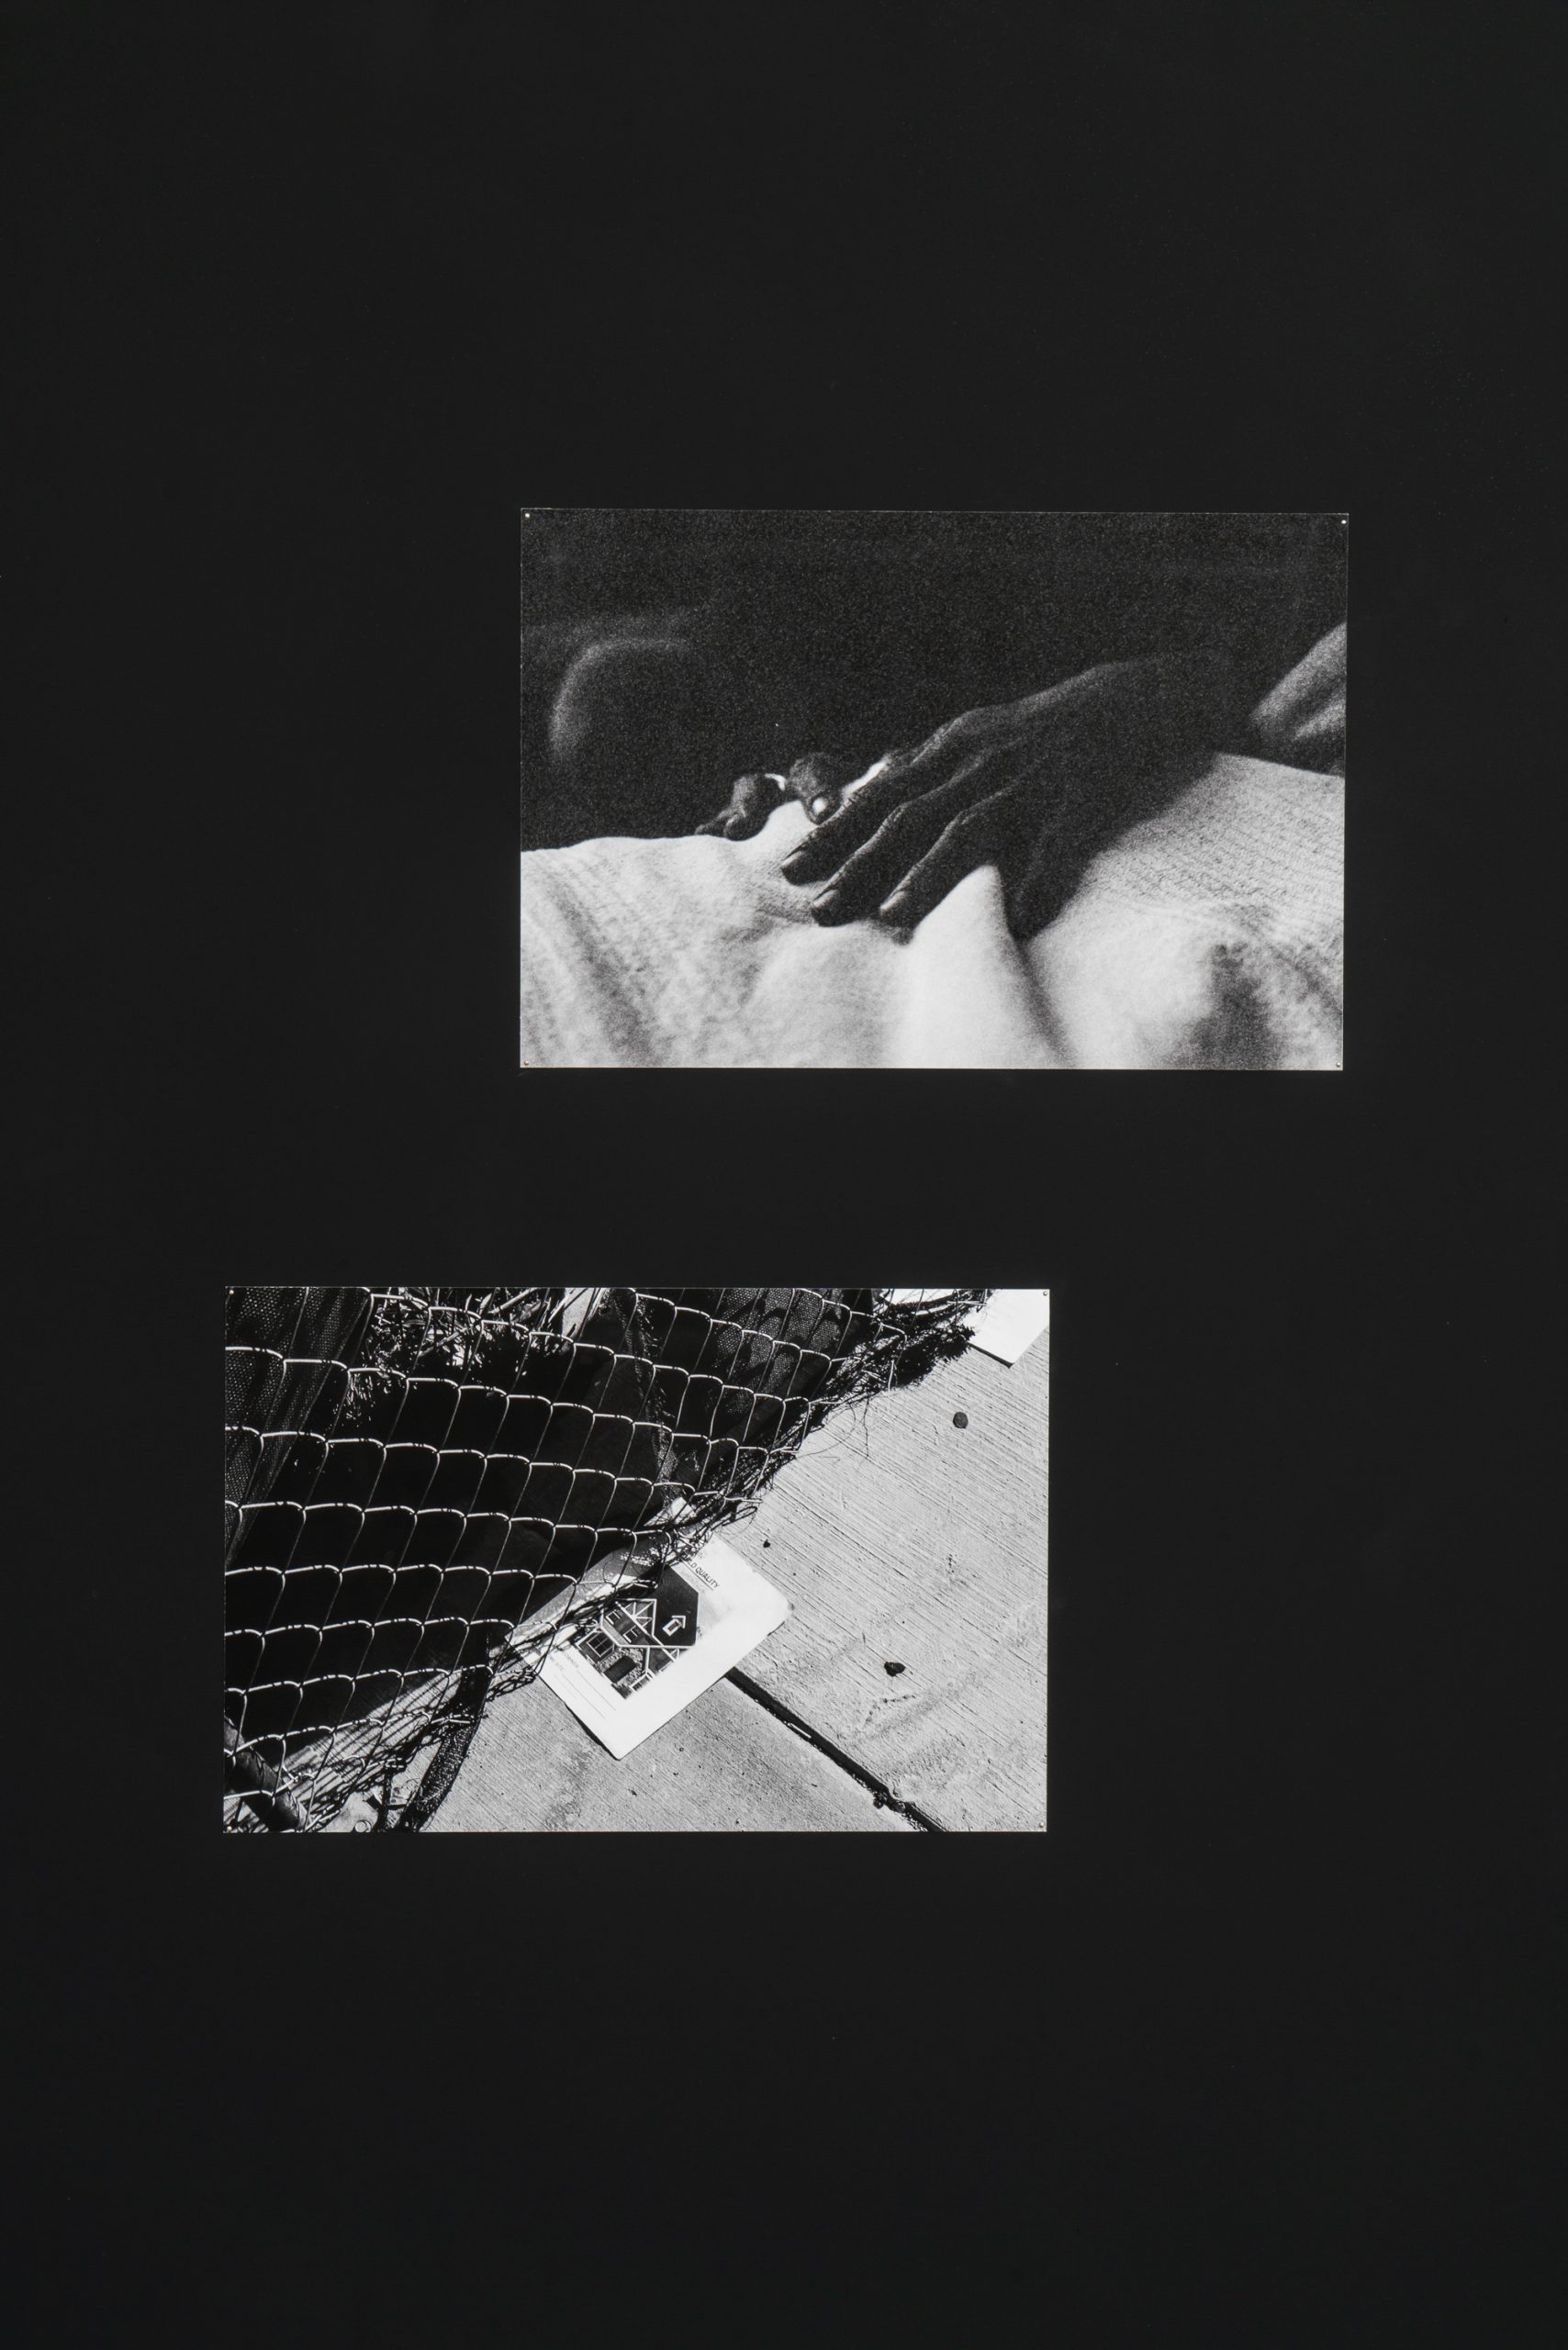 Image: A detail shot of two black and white photographs by Abigail Taubman. The top image is of a hand touching fabric, and the bottom image shows a piece of paper stuck under a fence. Photo by Robert Chase Heishman.